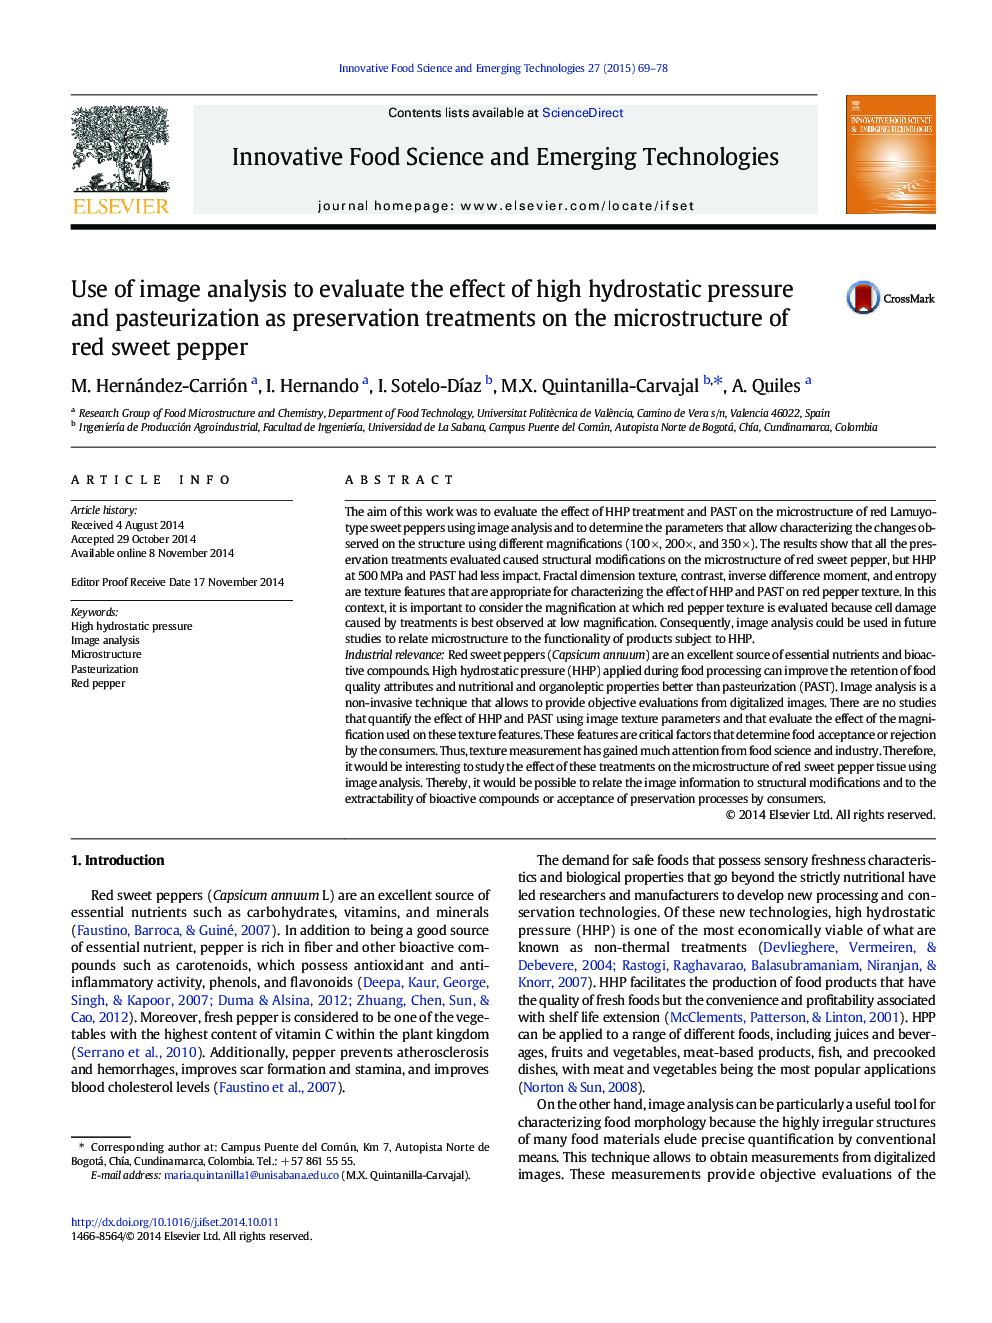 Use of image analysis to evaluate the effect of high hydrostatic pressure and pasteurization as preservation treatments on the microstructure of red sweet pepper